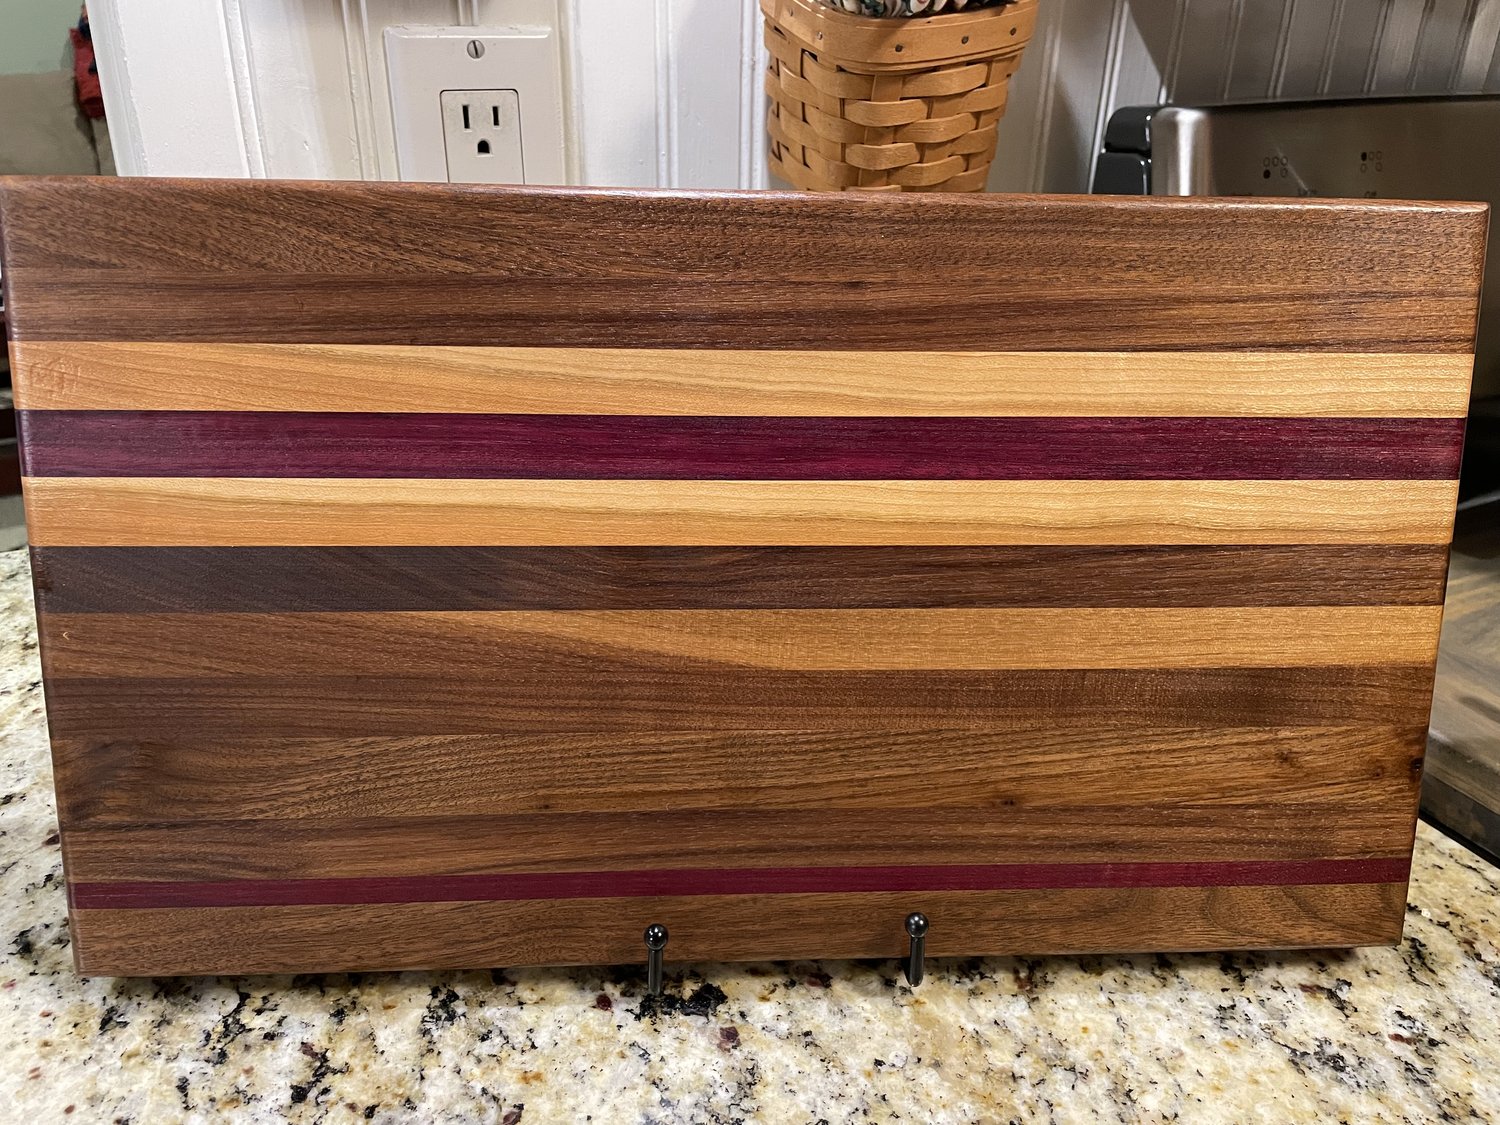 Montana Made Cutting Board with Handle in Walnut, Purpleheart and